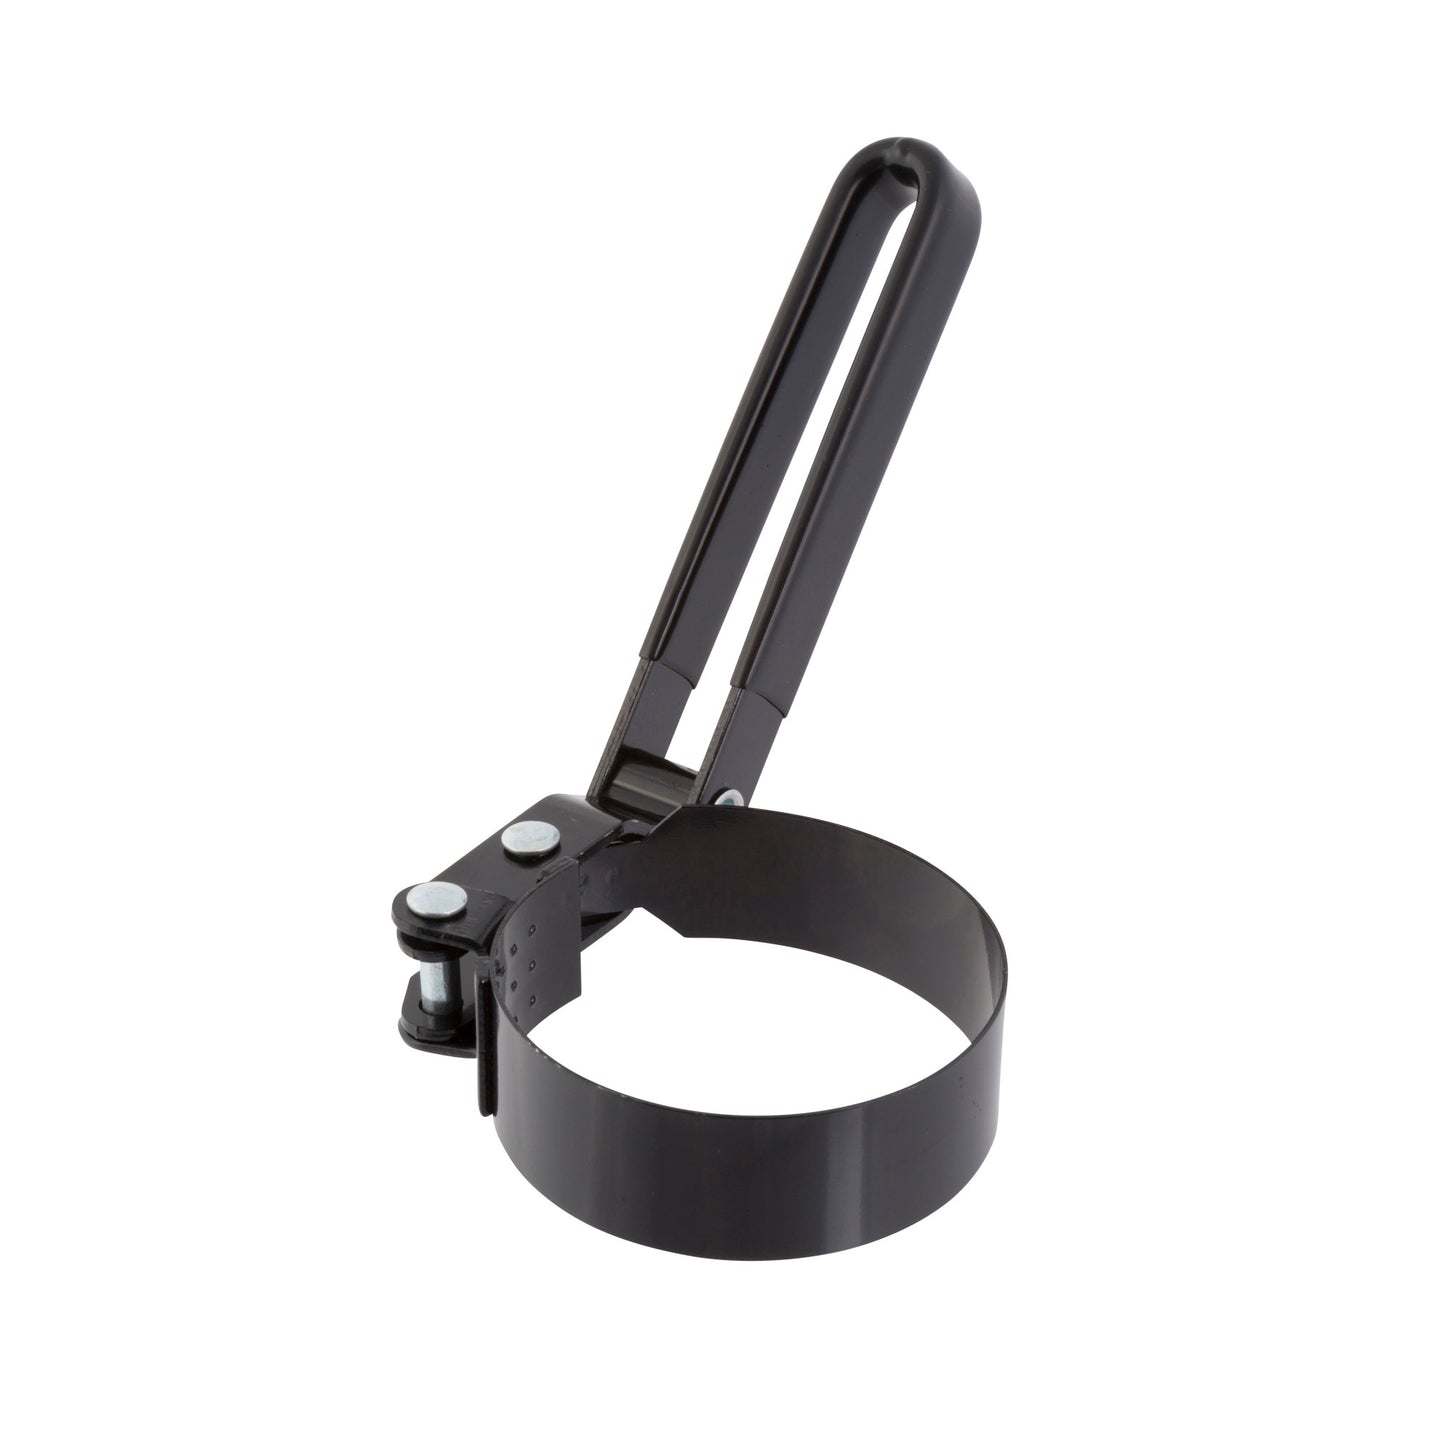 Oil Filter Wrench 2-1/2-inch to 3-inch